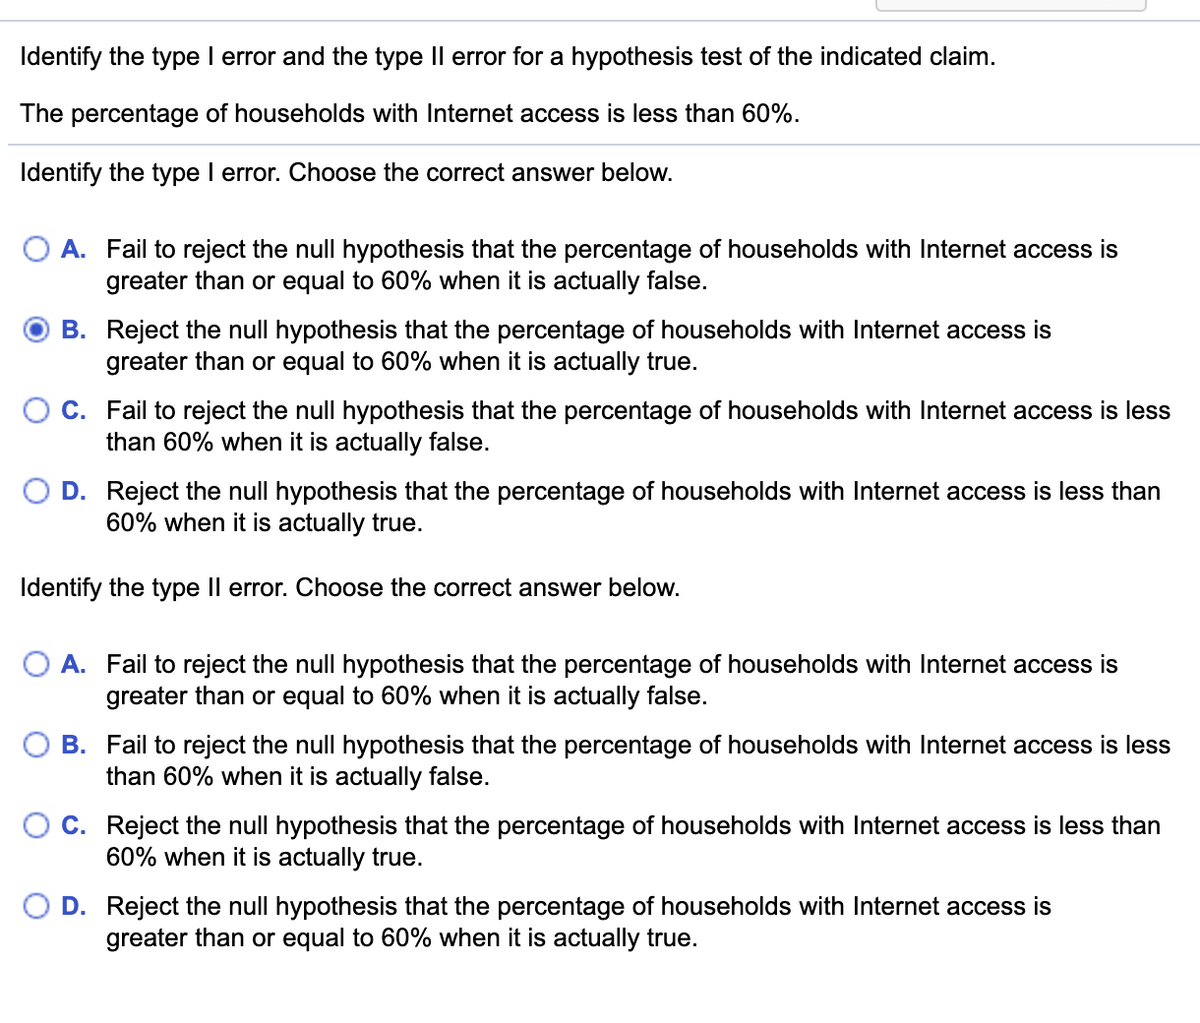 Identify the type I error and the type Il error for a hypothesis test of the indicated claim.
The percentage of households with Internet access is less than 60%.
Identify the type I error. Choose the correct answer below.
O A. Fail to reject the null hypothesis that the percentage of households with Internet access is
greater than or equal to 60% when it is actually false.
B. Reject the null hypothesis that the percentage of households with Internet access is
greater than or equal to 60% when it is actually true.
C. Fail to reject the null hypothesis that the percentage of households with Internet access is less
than 60% when it is actually false.
D. Reject the null hypothesis that the percentage of households with Internet access is less than
60% when it is actually true.
Identify the type Il error. Choose the correct answer below.
O A. Fail to reject the null hypothesis that the percentage of households with Internet access is
greater than or equal to 60% when it is actually false.
B. Fail to reject the null hypothesis that the percentage of households with Internet access is less
than 60% when it is actually false.
O C. Reject the null hypothesis that the percentage of households with Internet access is less than
60% when it is actually true.
D. Reject the null hypothesis that the percentage of households with Internet access is
greater than or equal to 60% when it is actually true.
